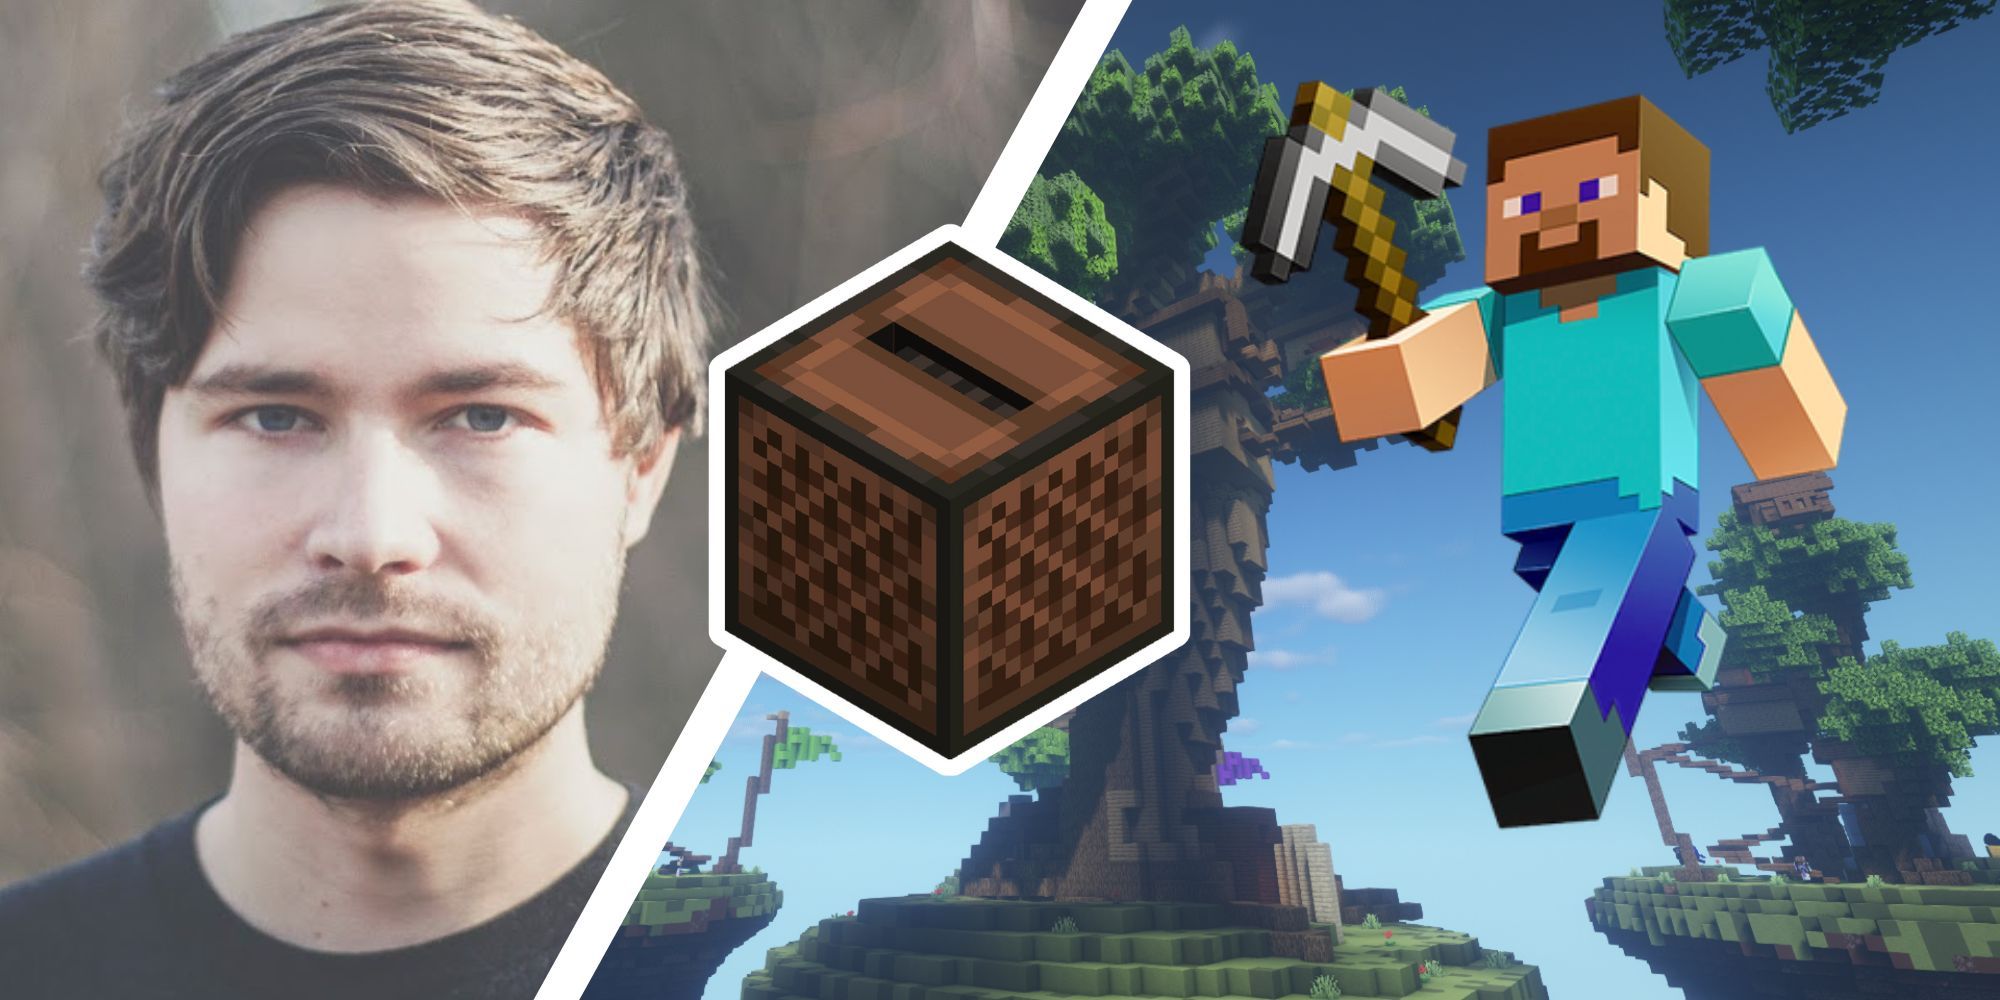 A split image of C418, a jukebox, and Steve from Minecraft.